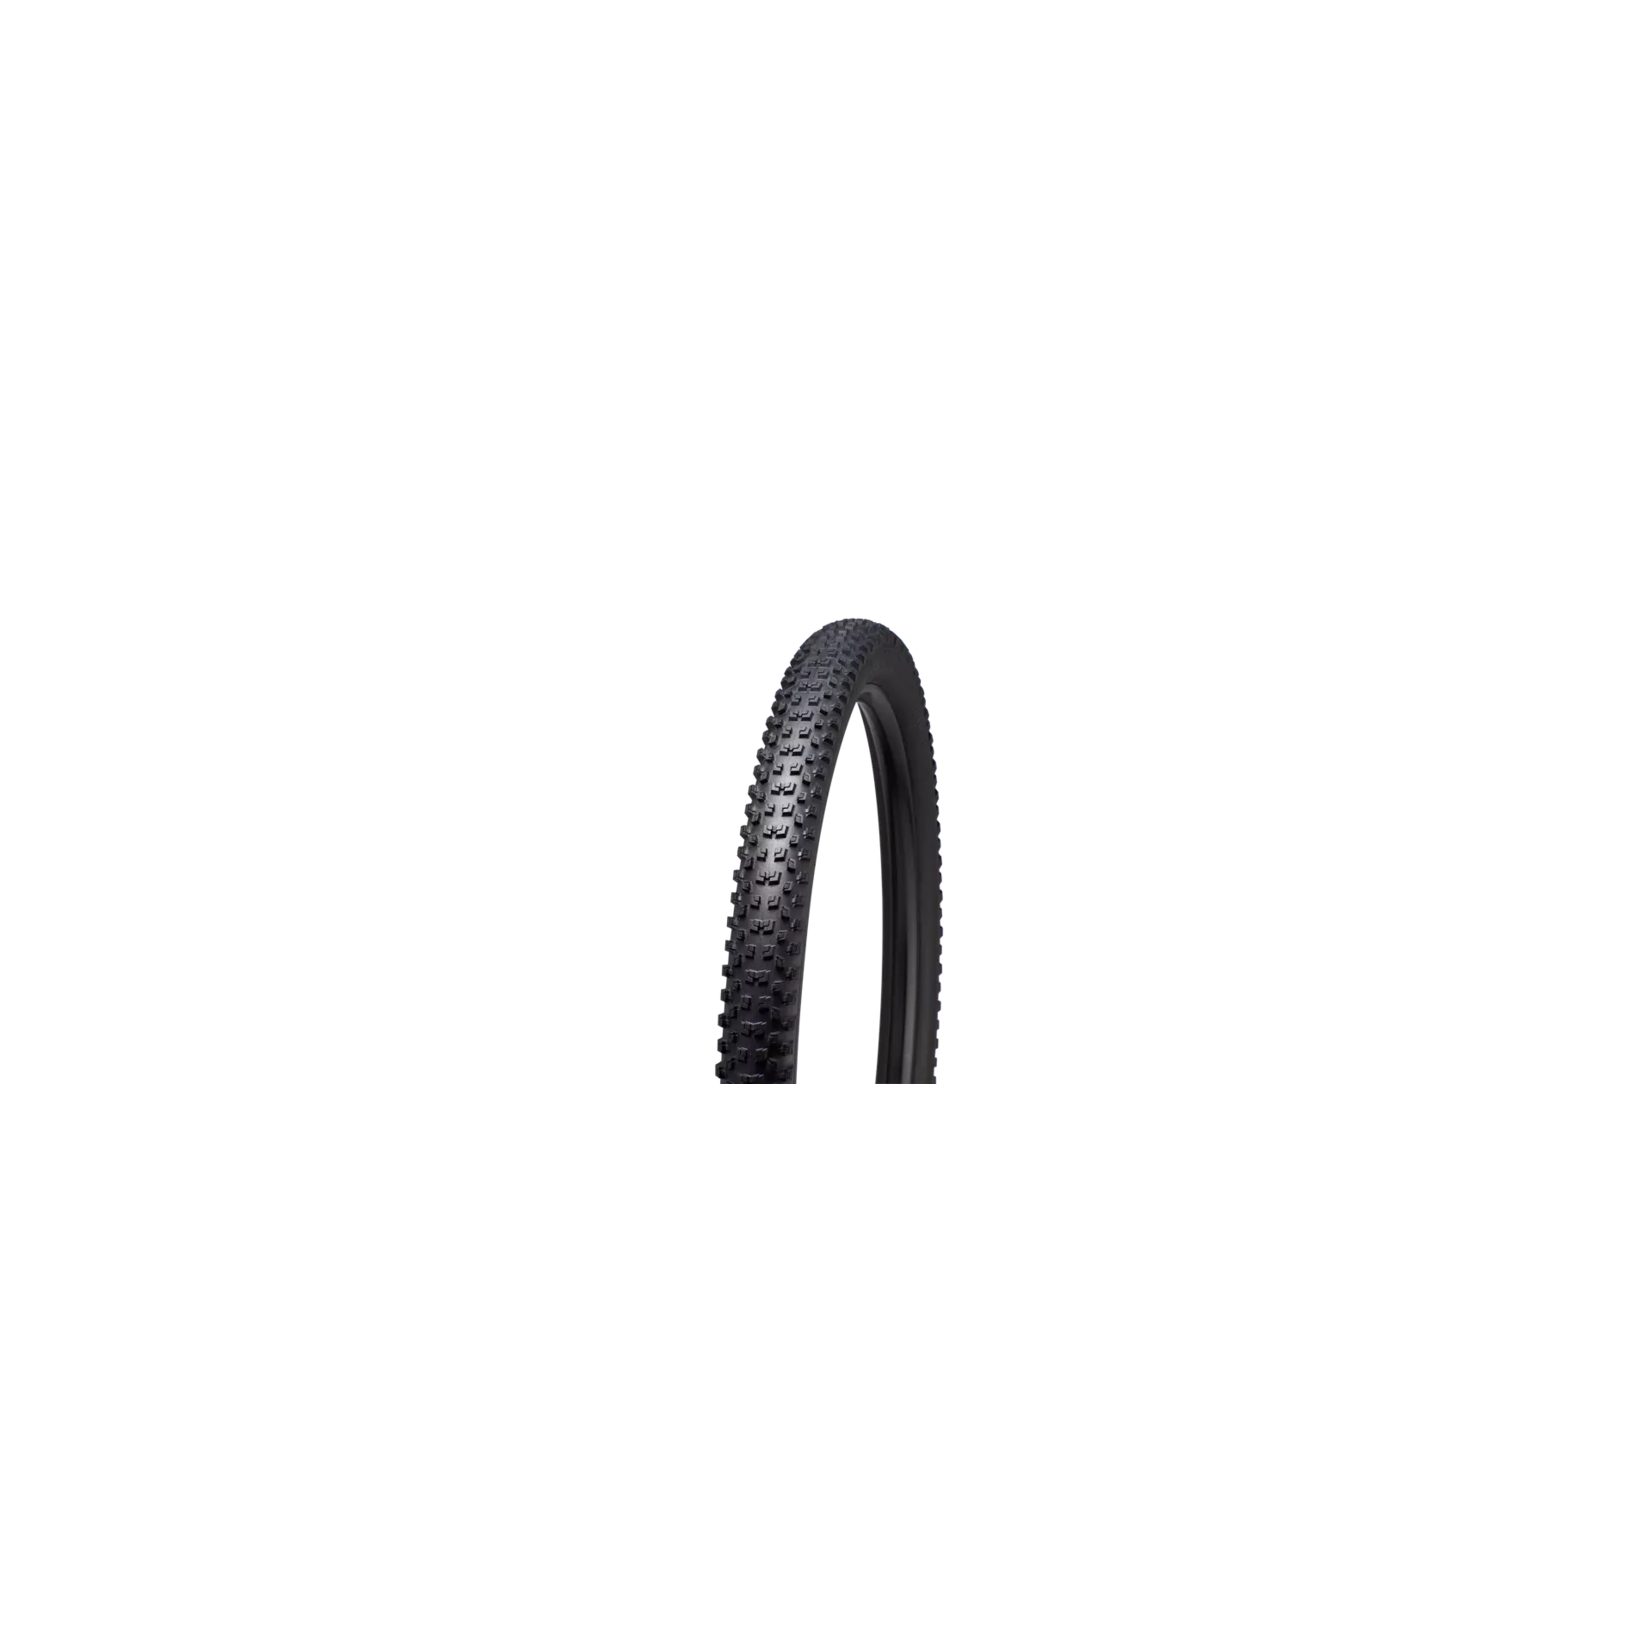 Specialized Secialized Ground Control 27.5x2.35 Folding Bead Tubeless Ready Tire Black